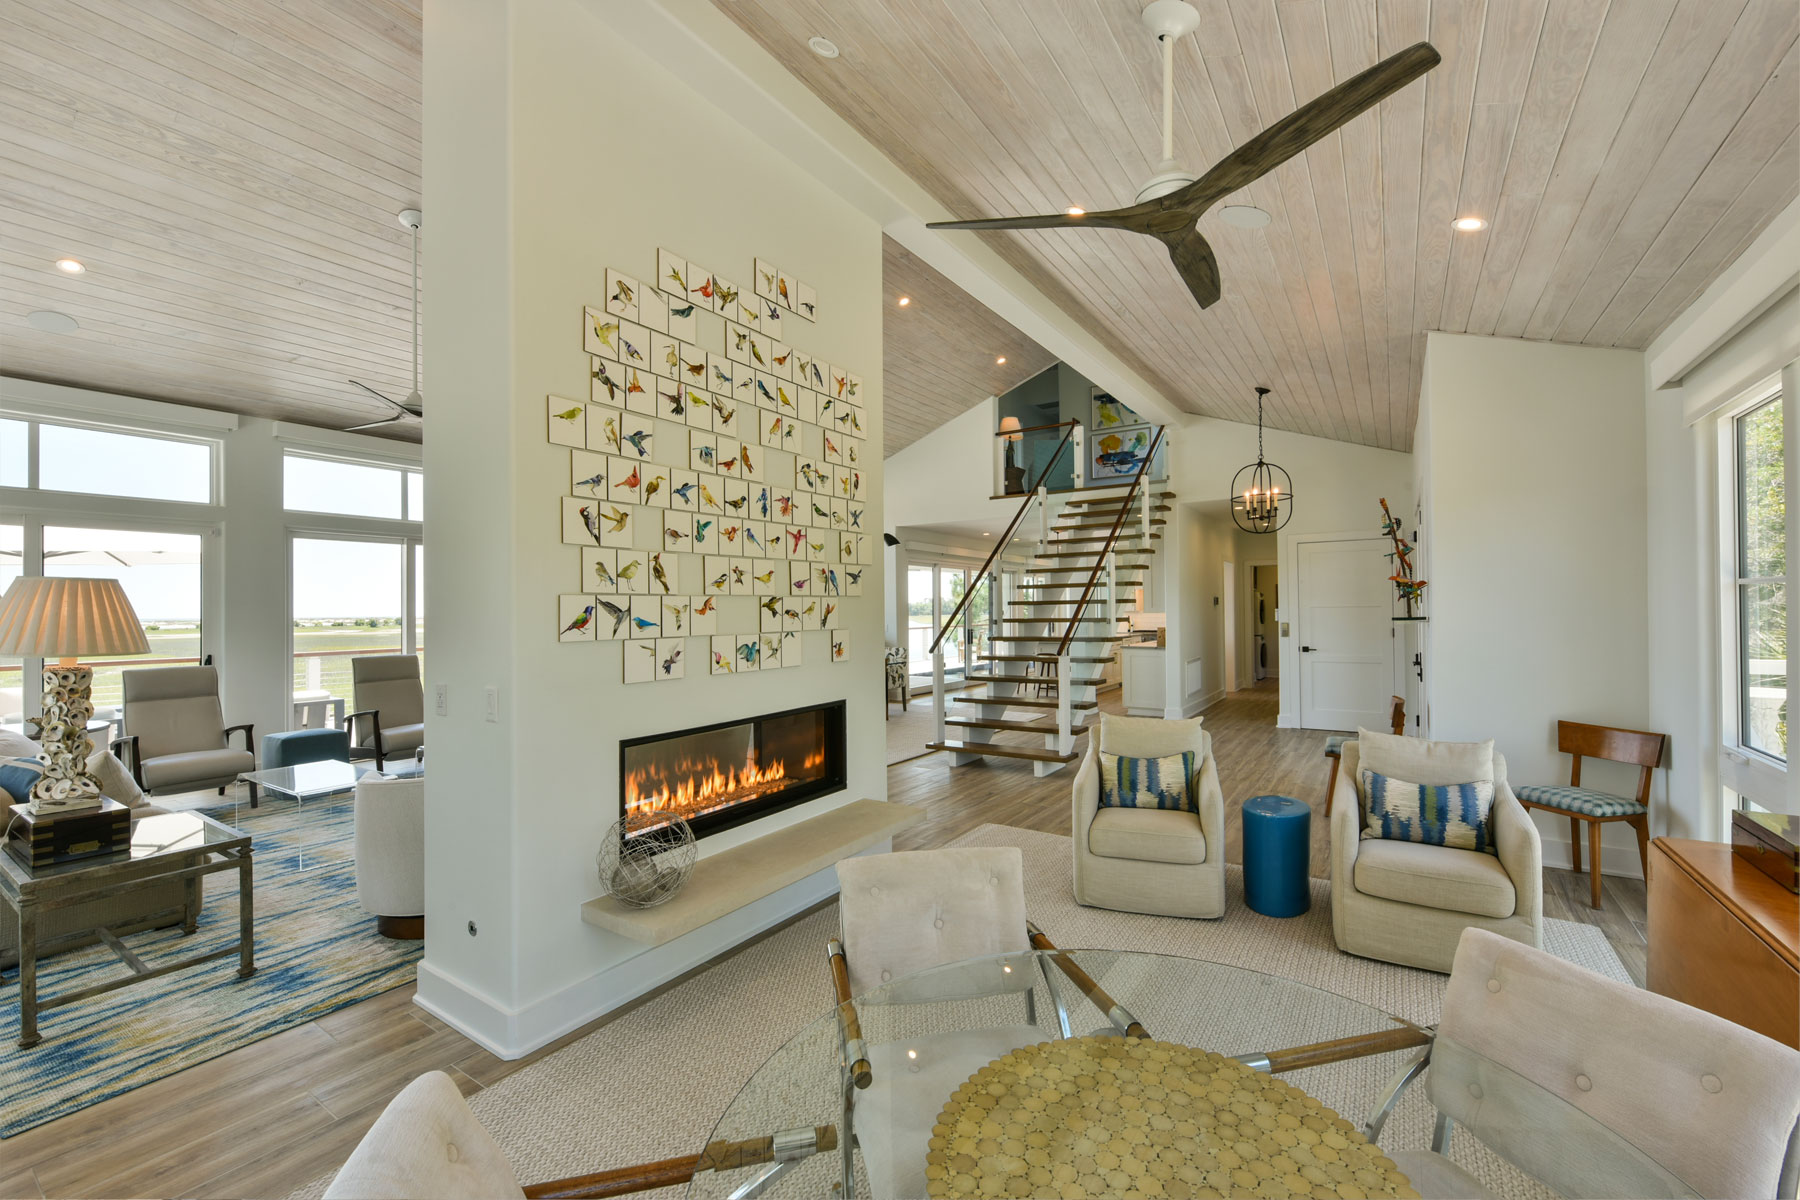 Double-sided fireplace separting game room and living room in coastal modern renovation of Seabrook Island home